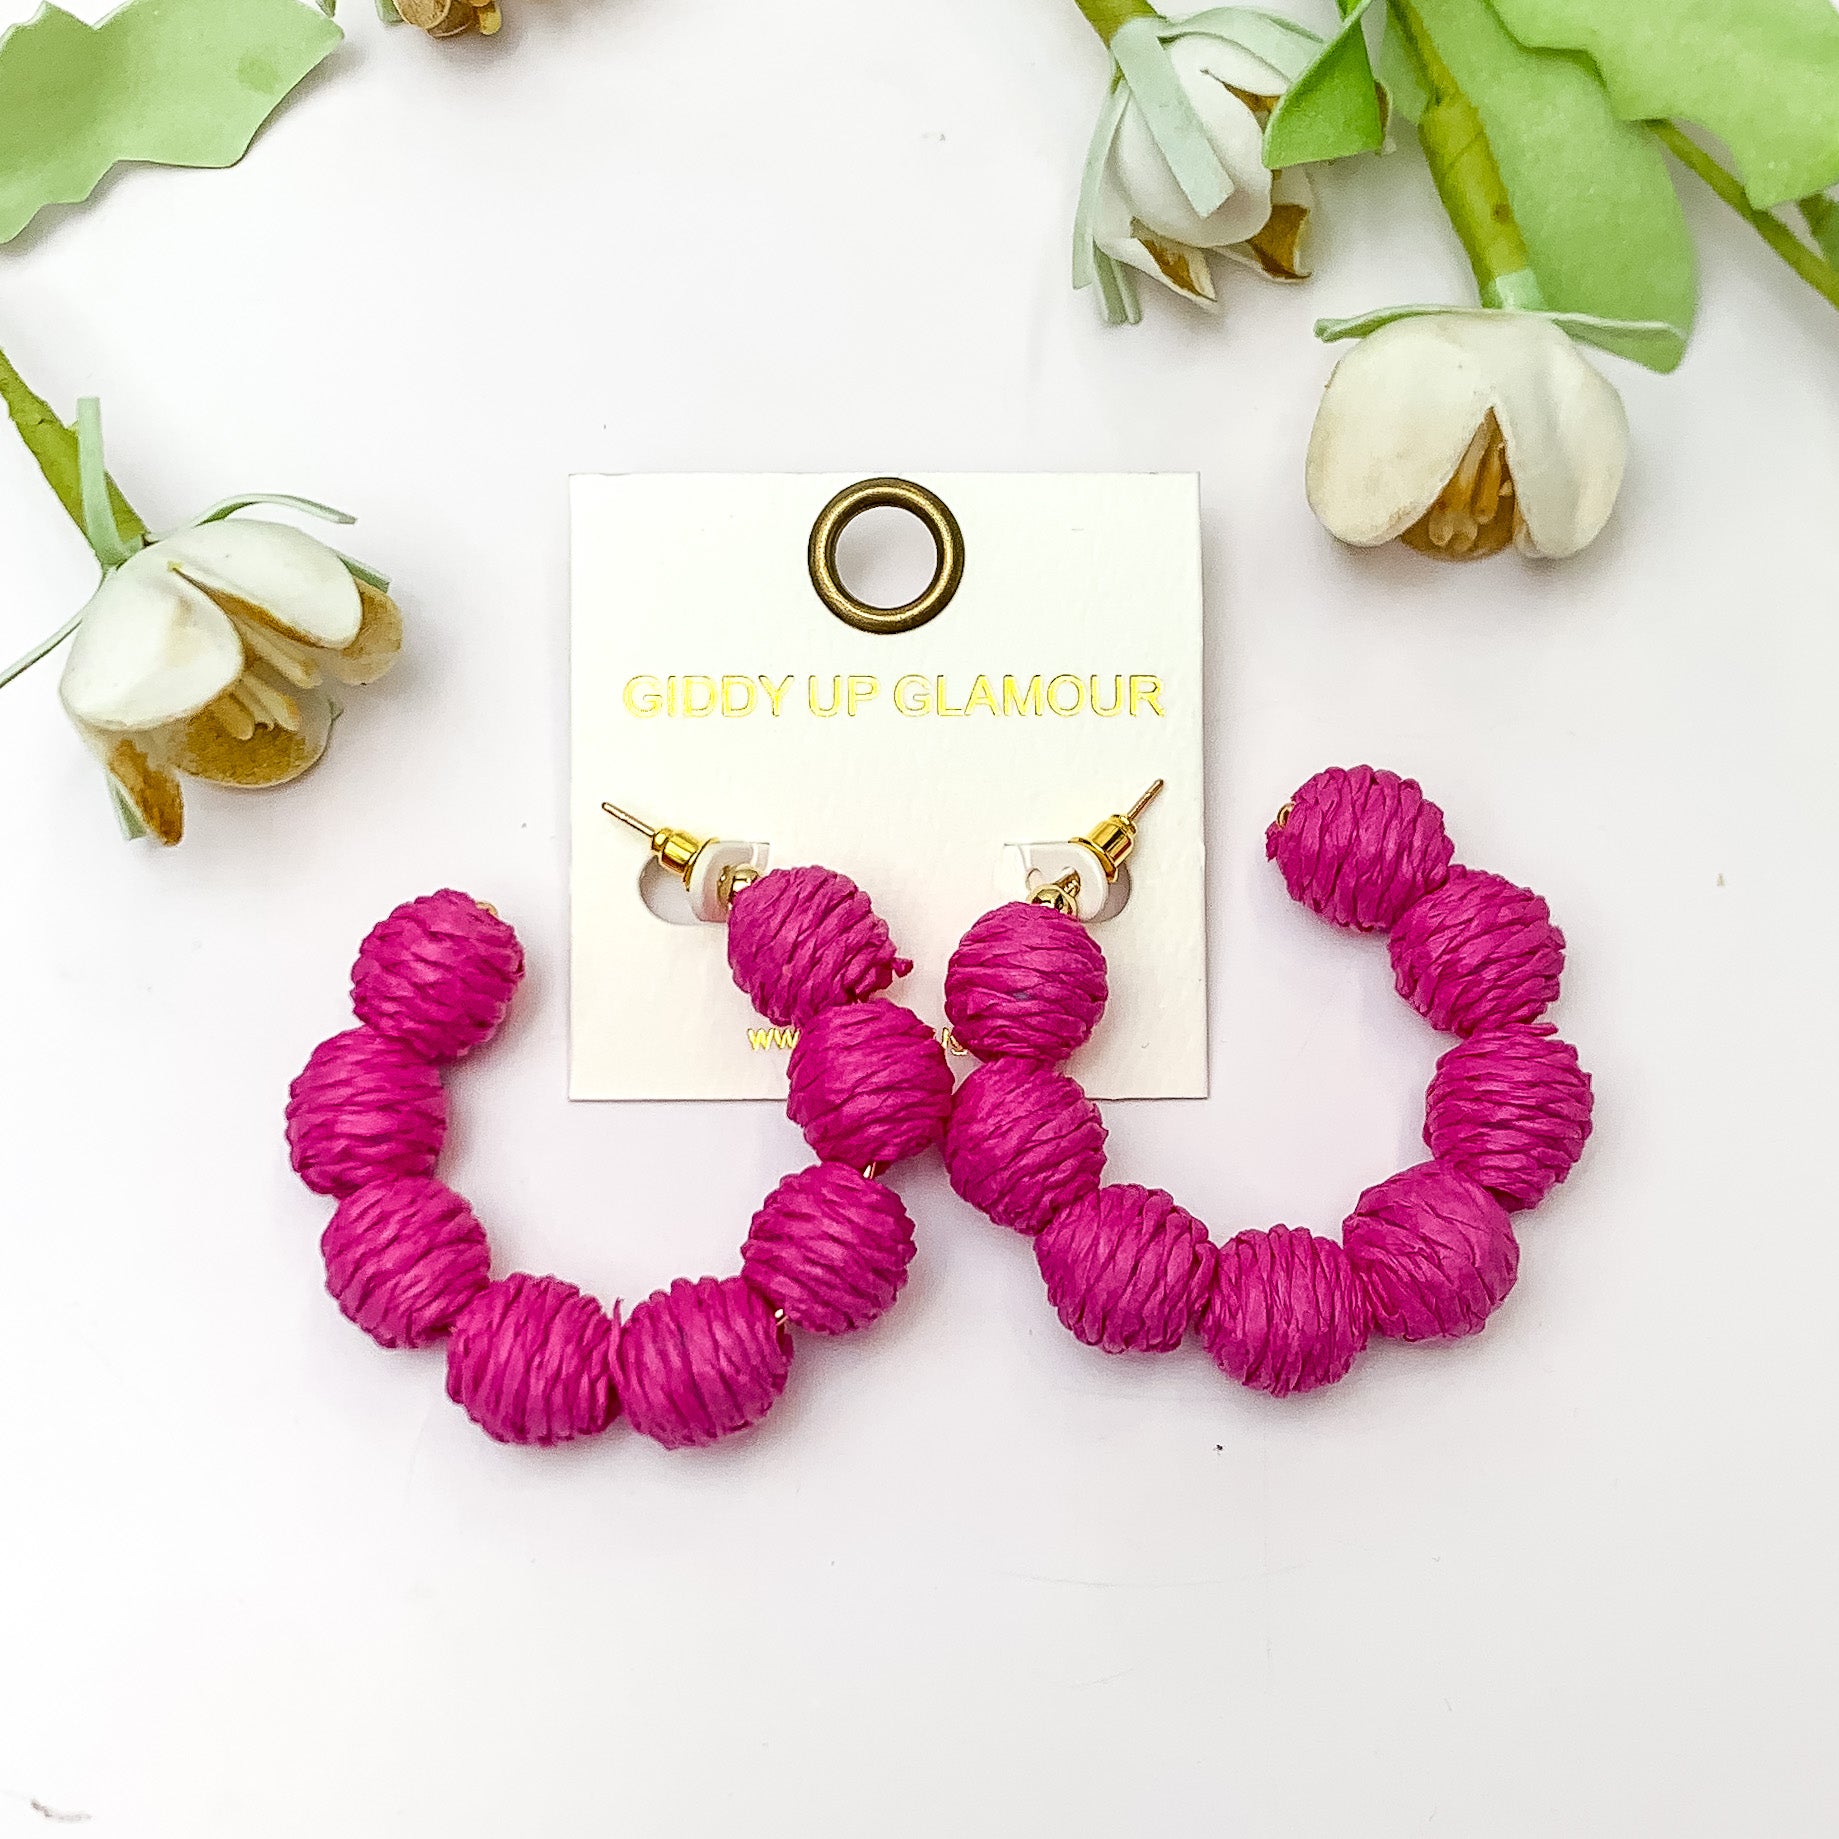 Sorbet Summer Raffia Ball Hoop Earrings in Hot Pink. Pictured on a white background with flowers above the earrings.